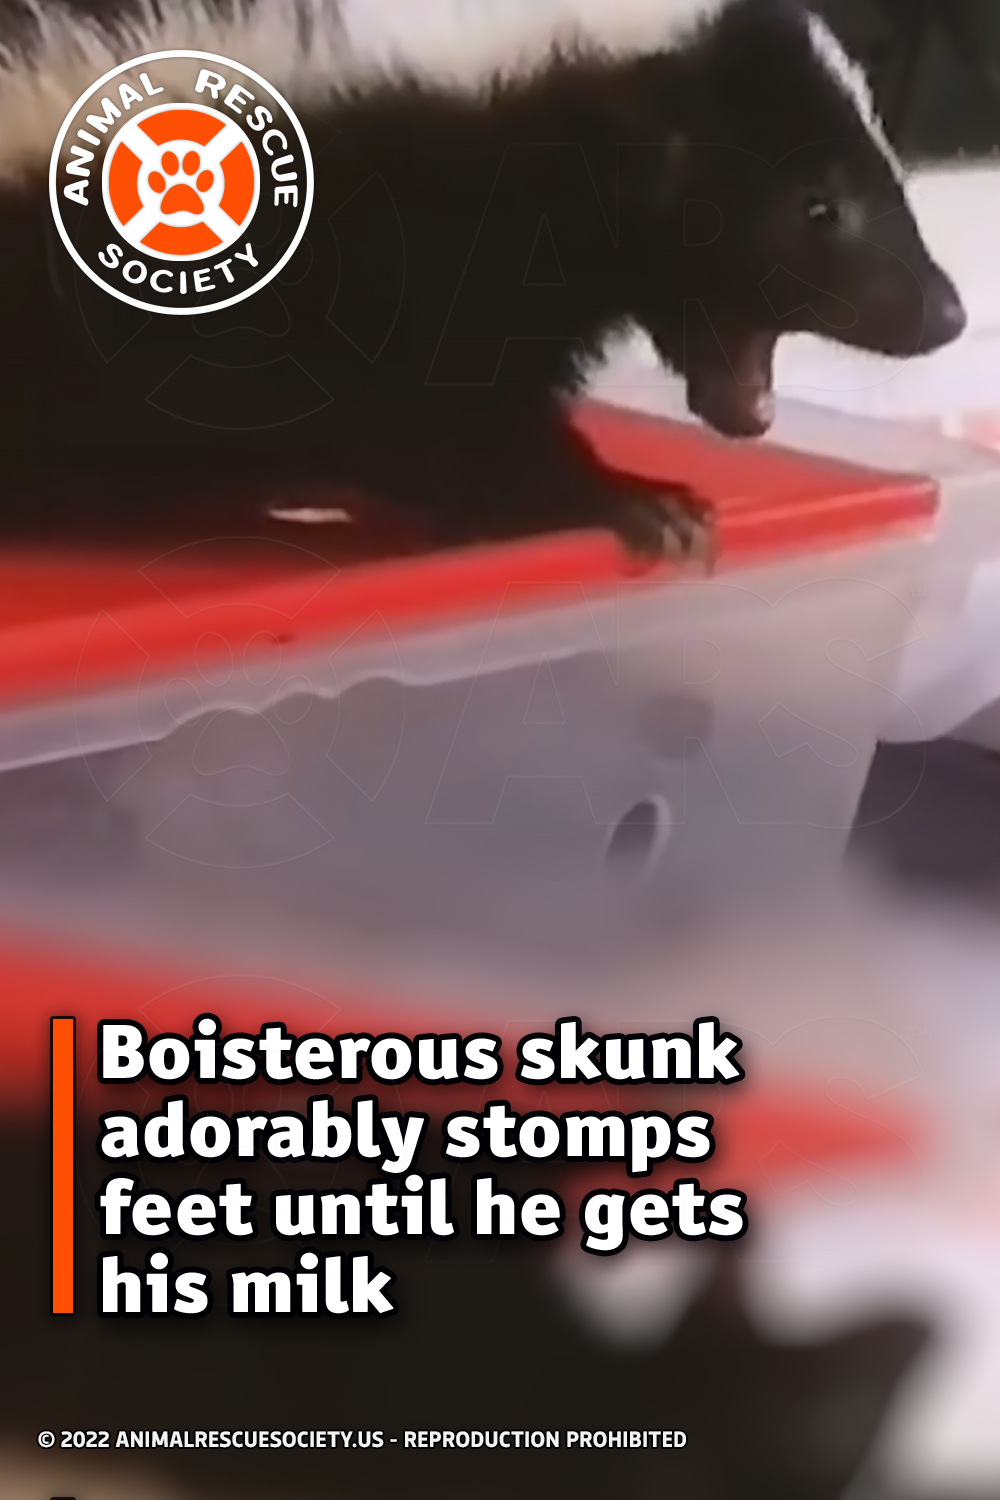 Boisterous skunk adorably stomps feet until he gets his milk